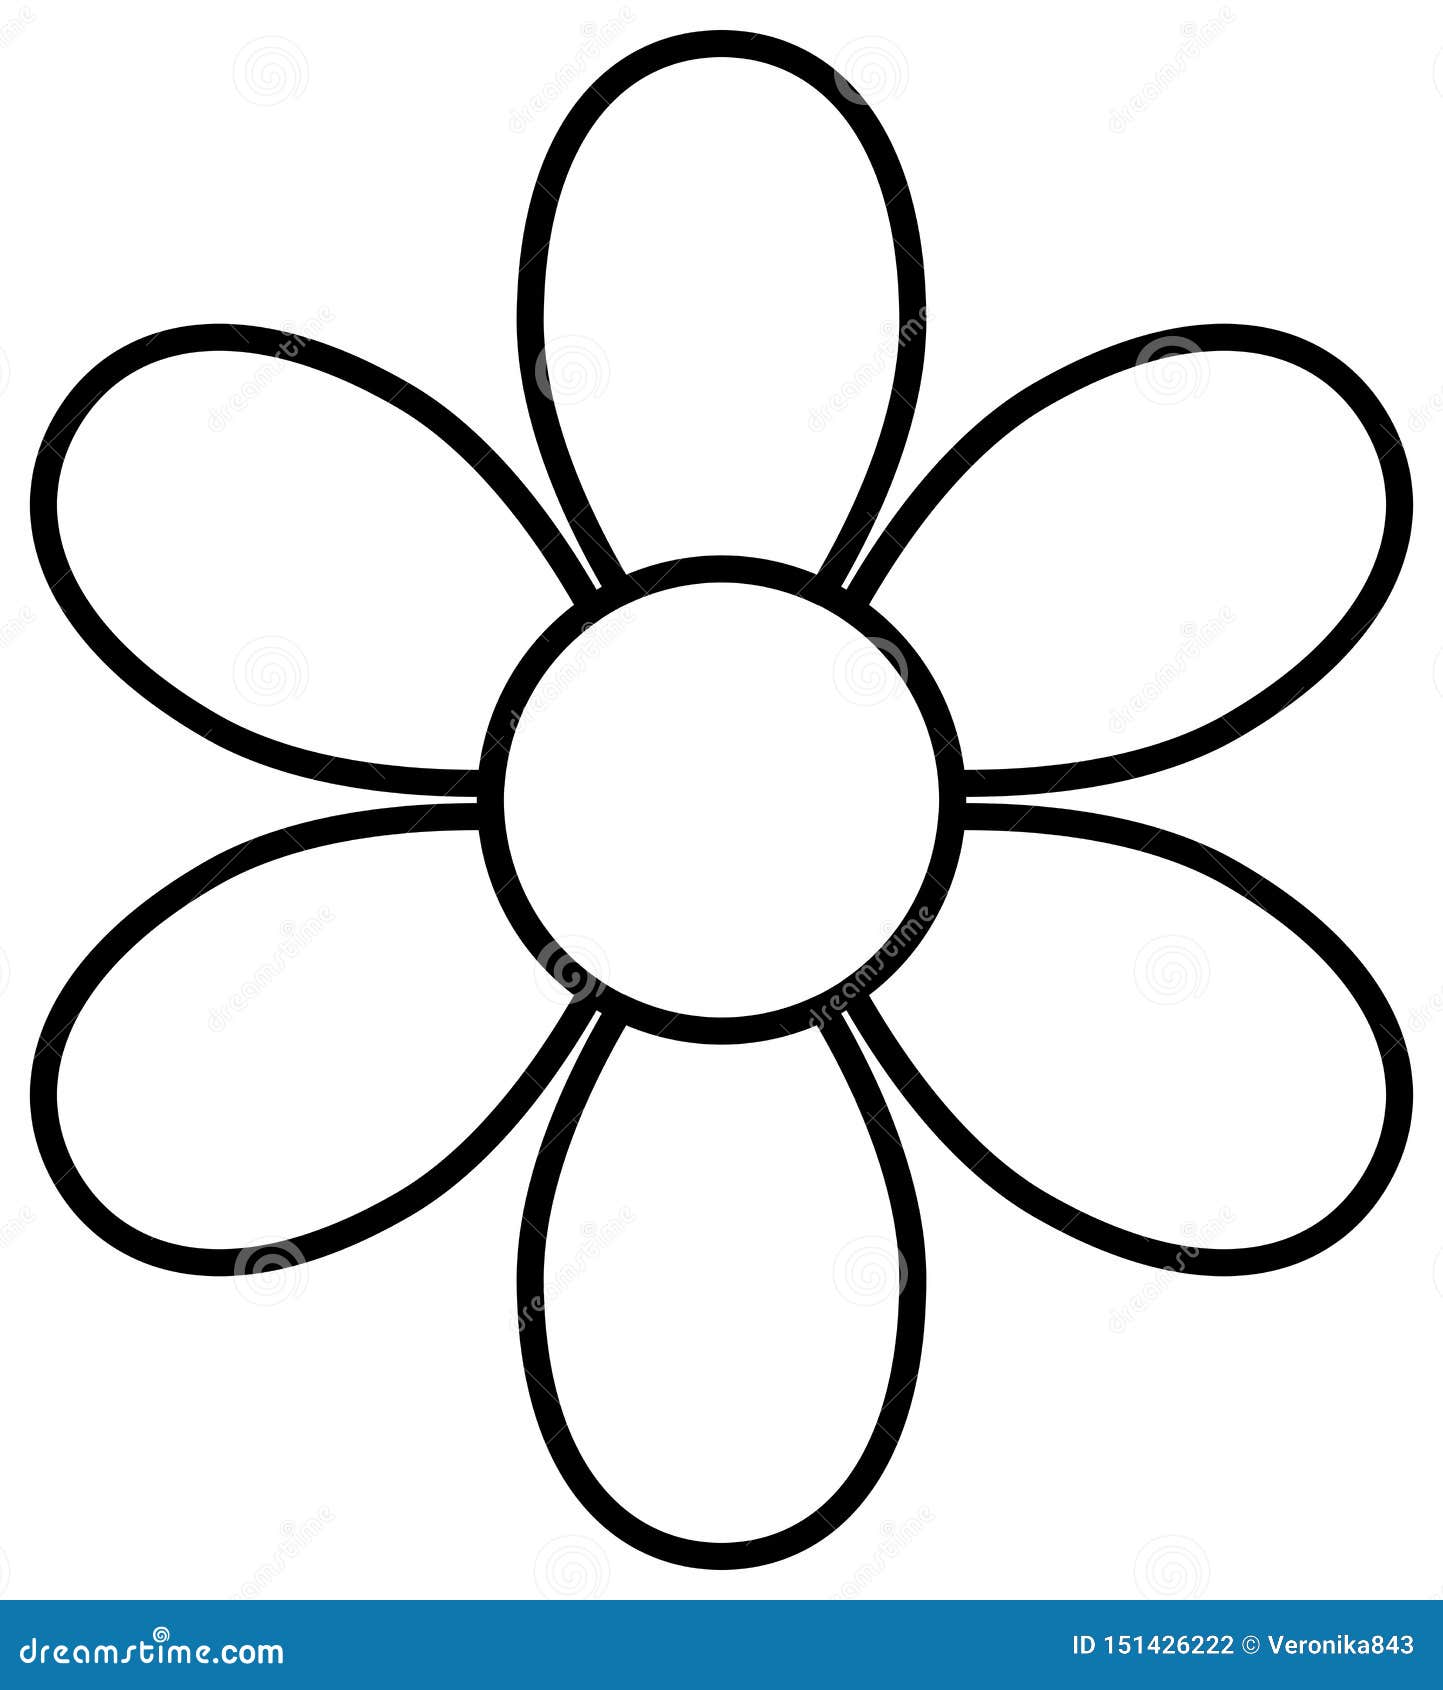 flower-outline-icon-vector-illustration-isolated-on-white-background